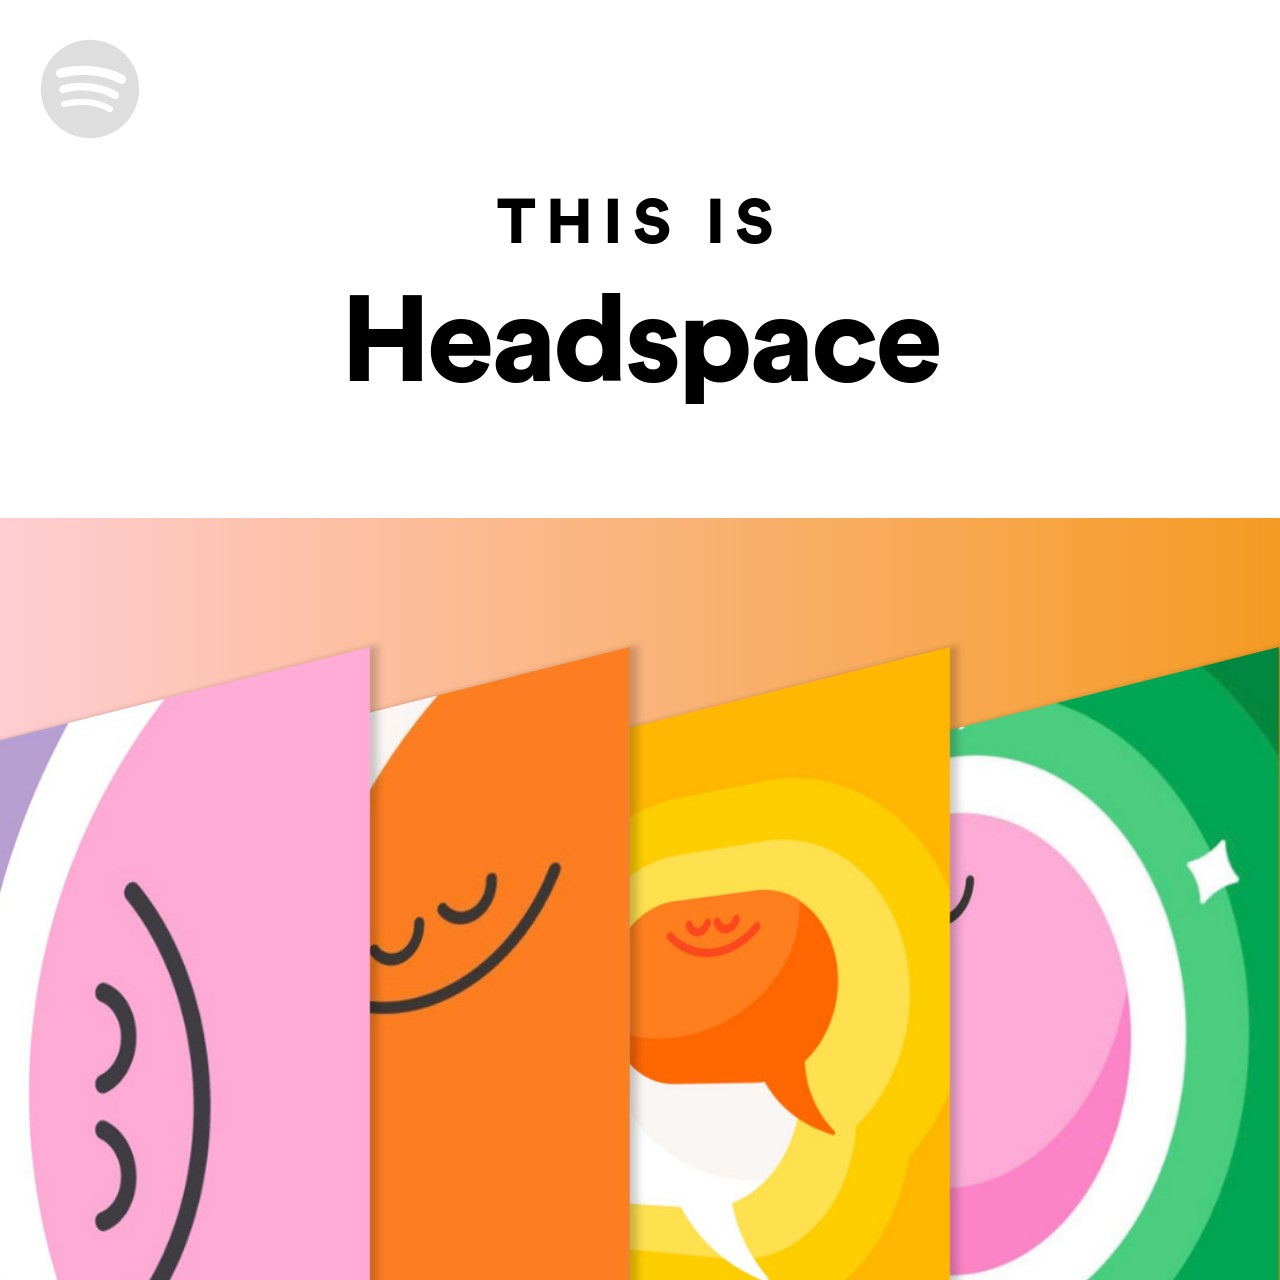 This Is Headspace